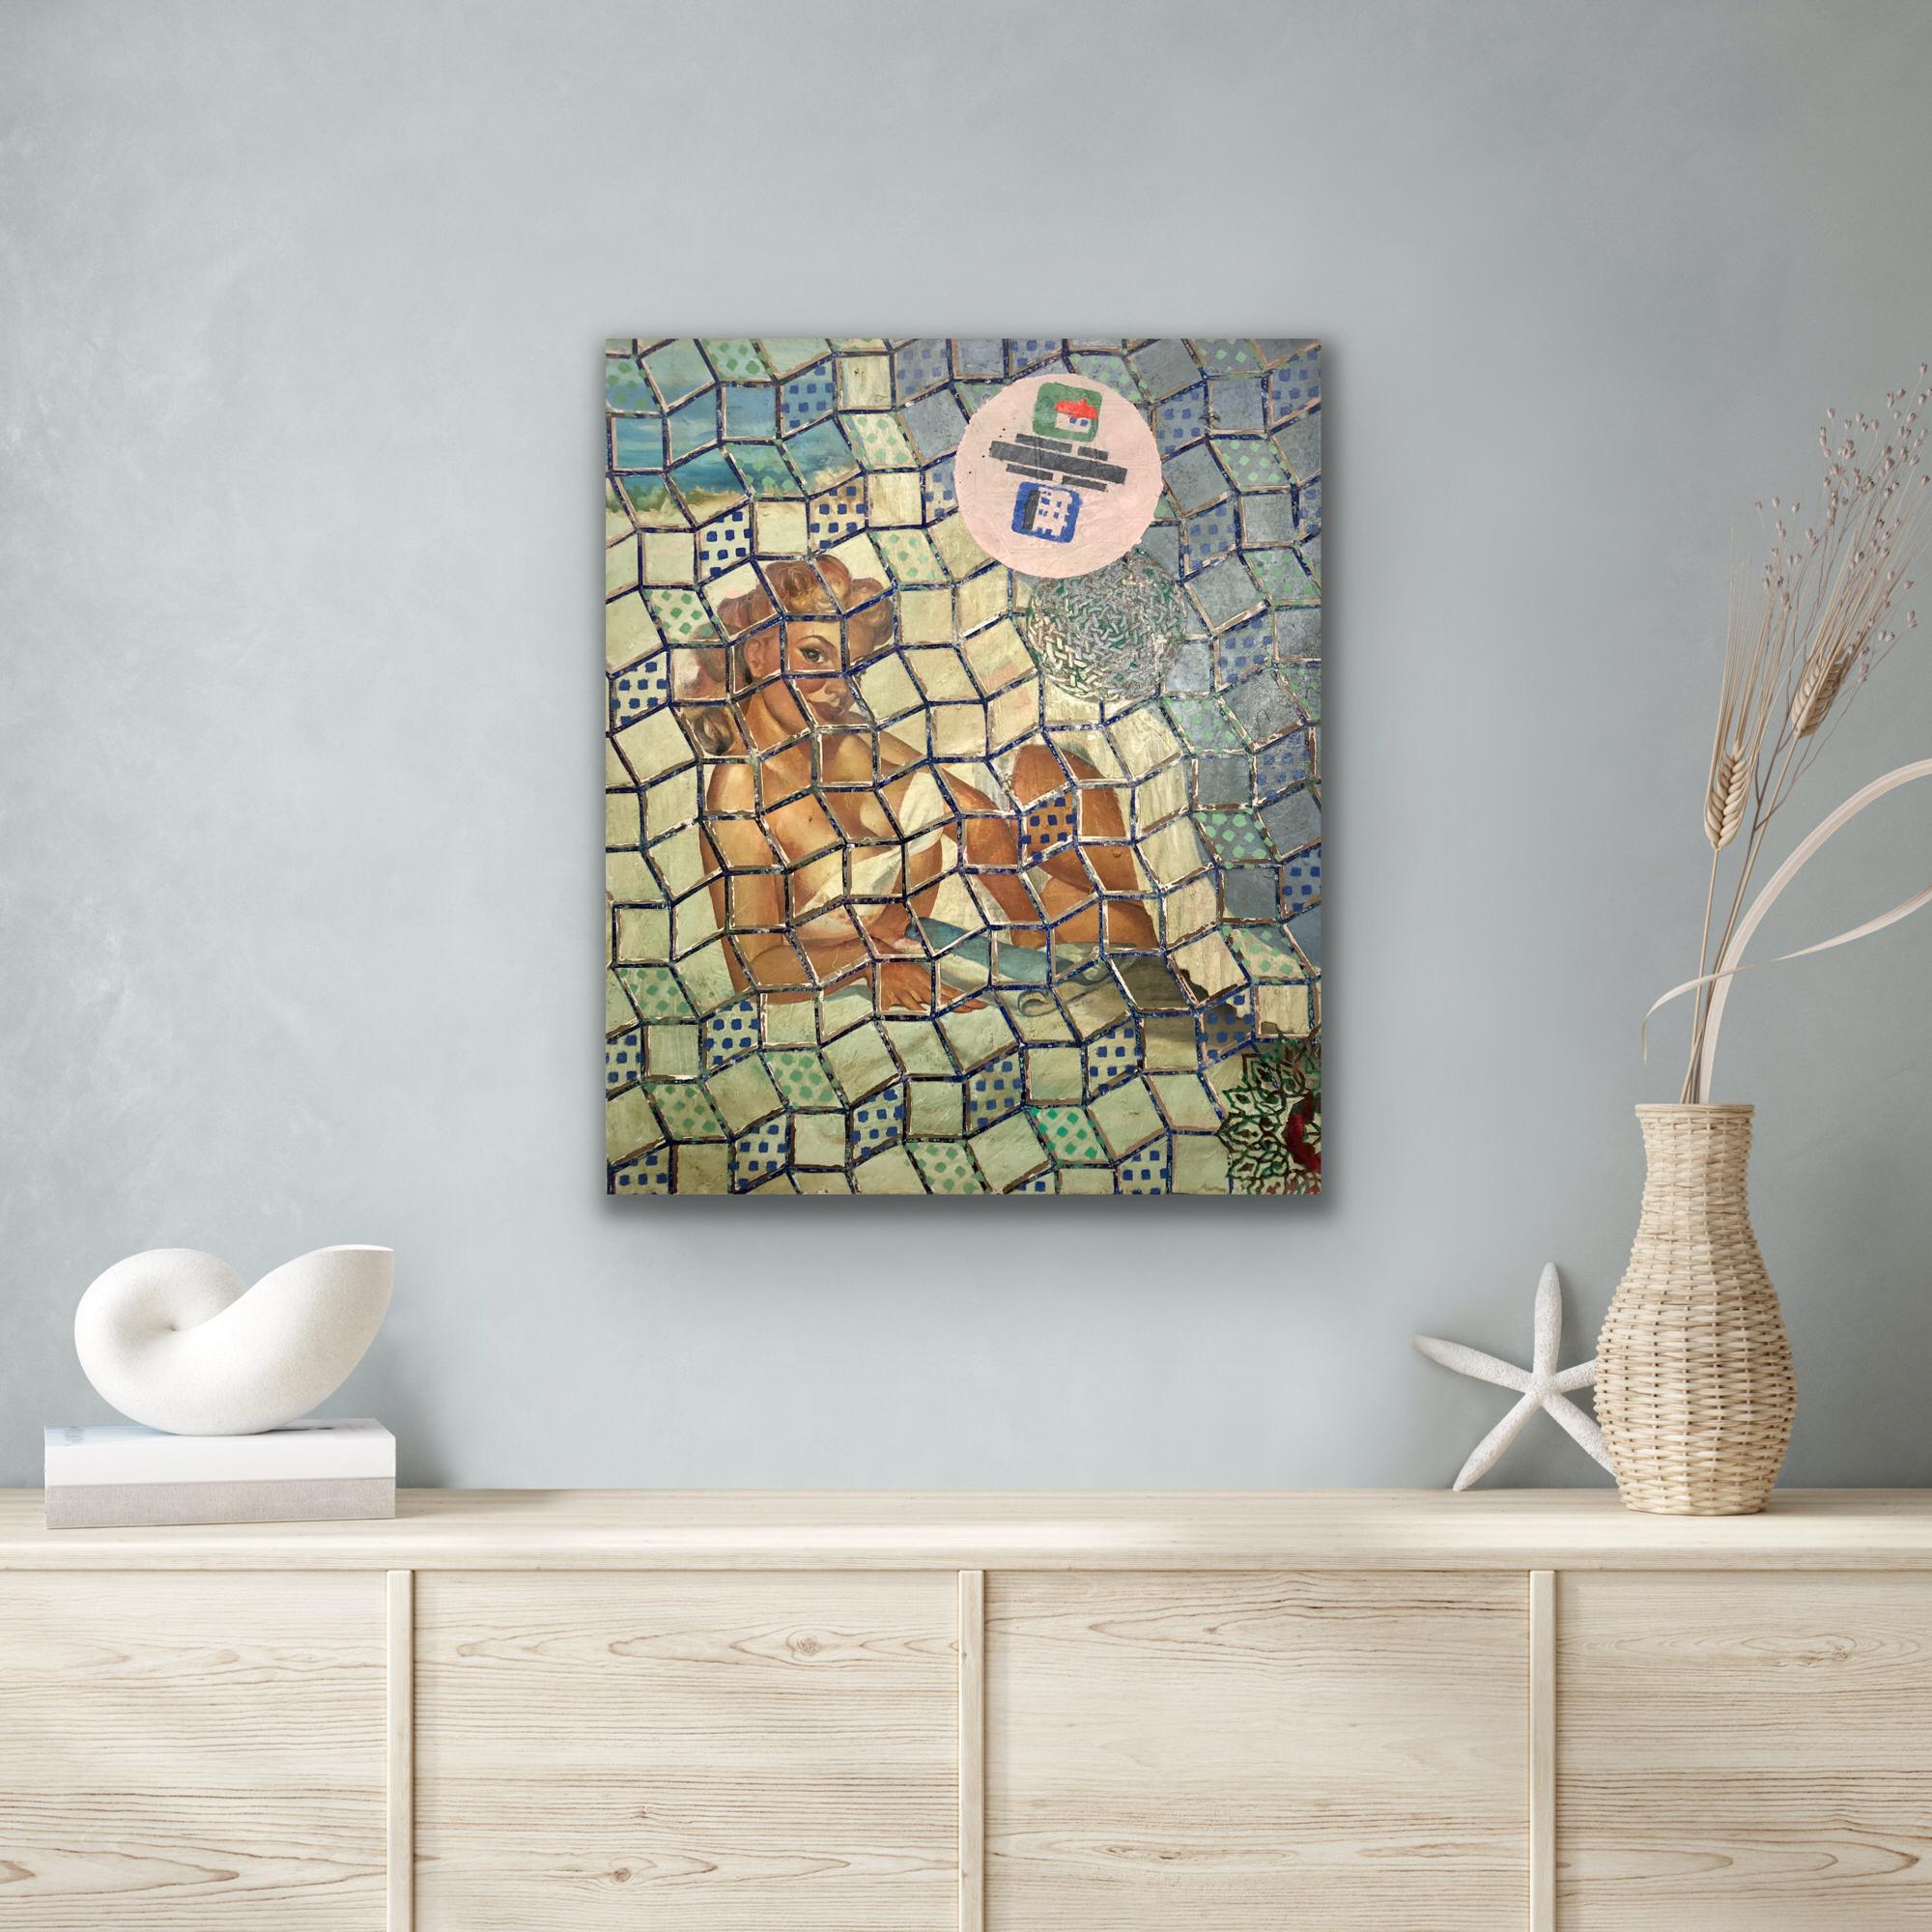 Figurative 'pin-up' portrait painting with abstract mosaic style background by Hungarian artist Dénes Wächter. Offered unframed.

Dénes Wächter creates unique post-pop art paintings by combining and connecting motifs, figures, patterns, and styles